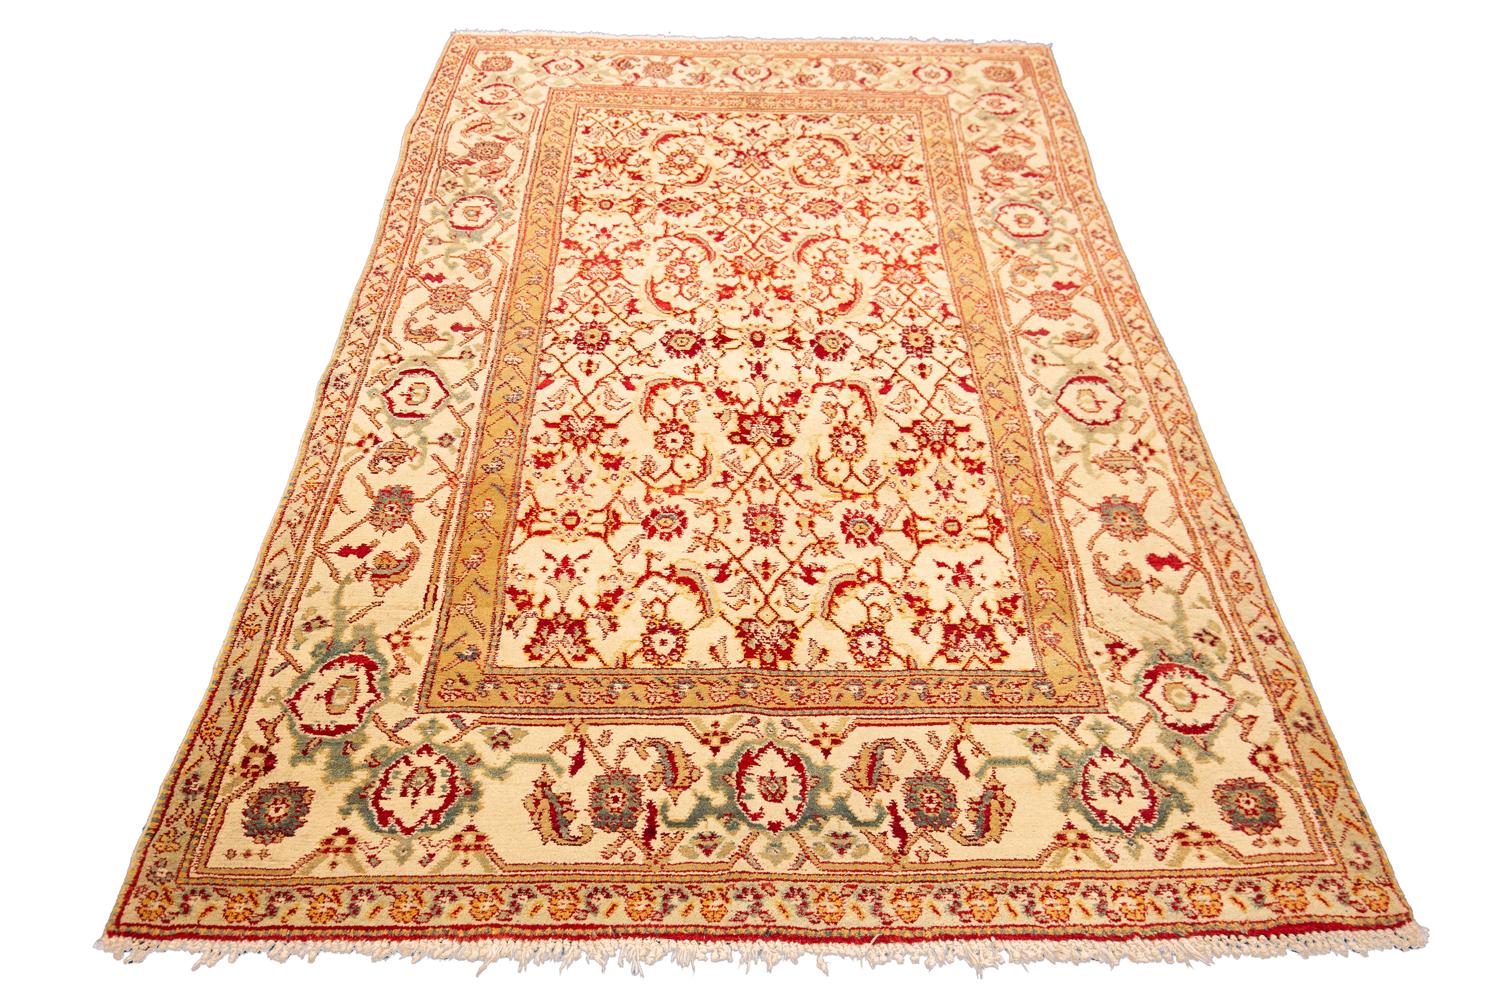 Hand-Knotted Indian Agra Fish Design Antique Rug Ivory Field Floral All-over For Sale